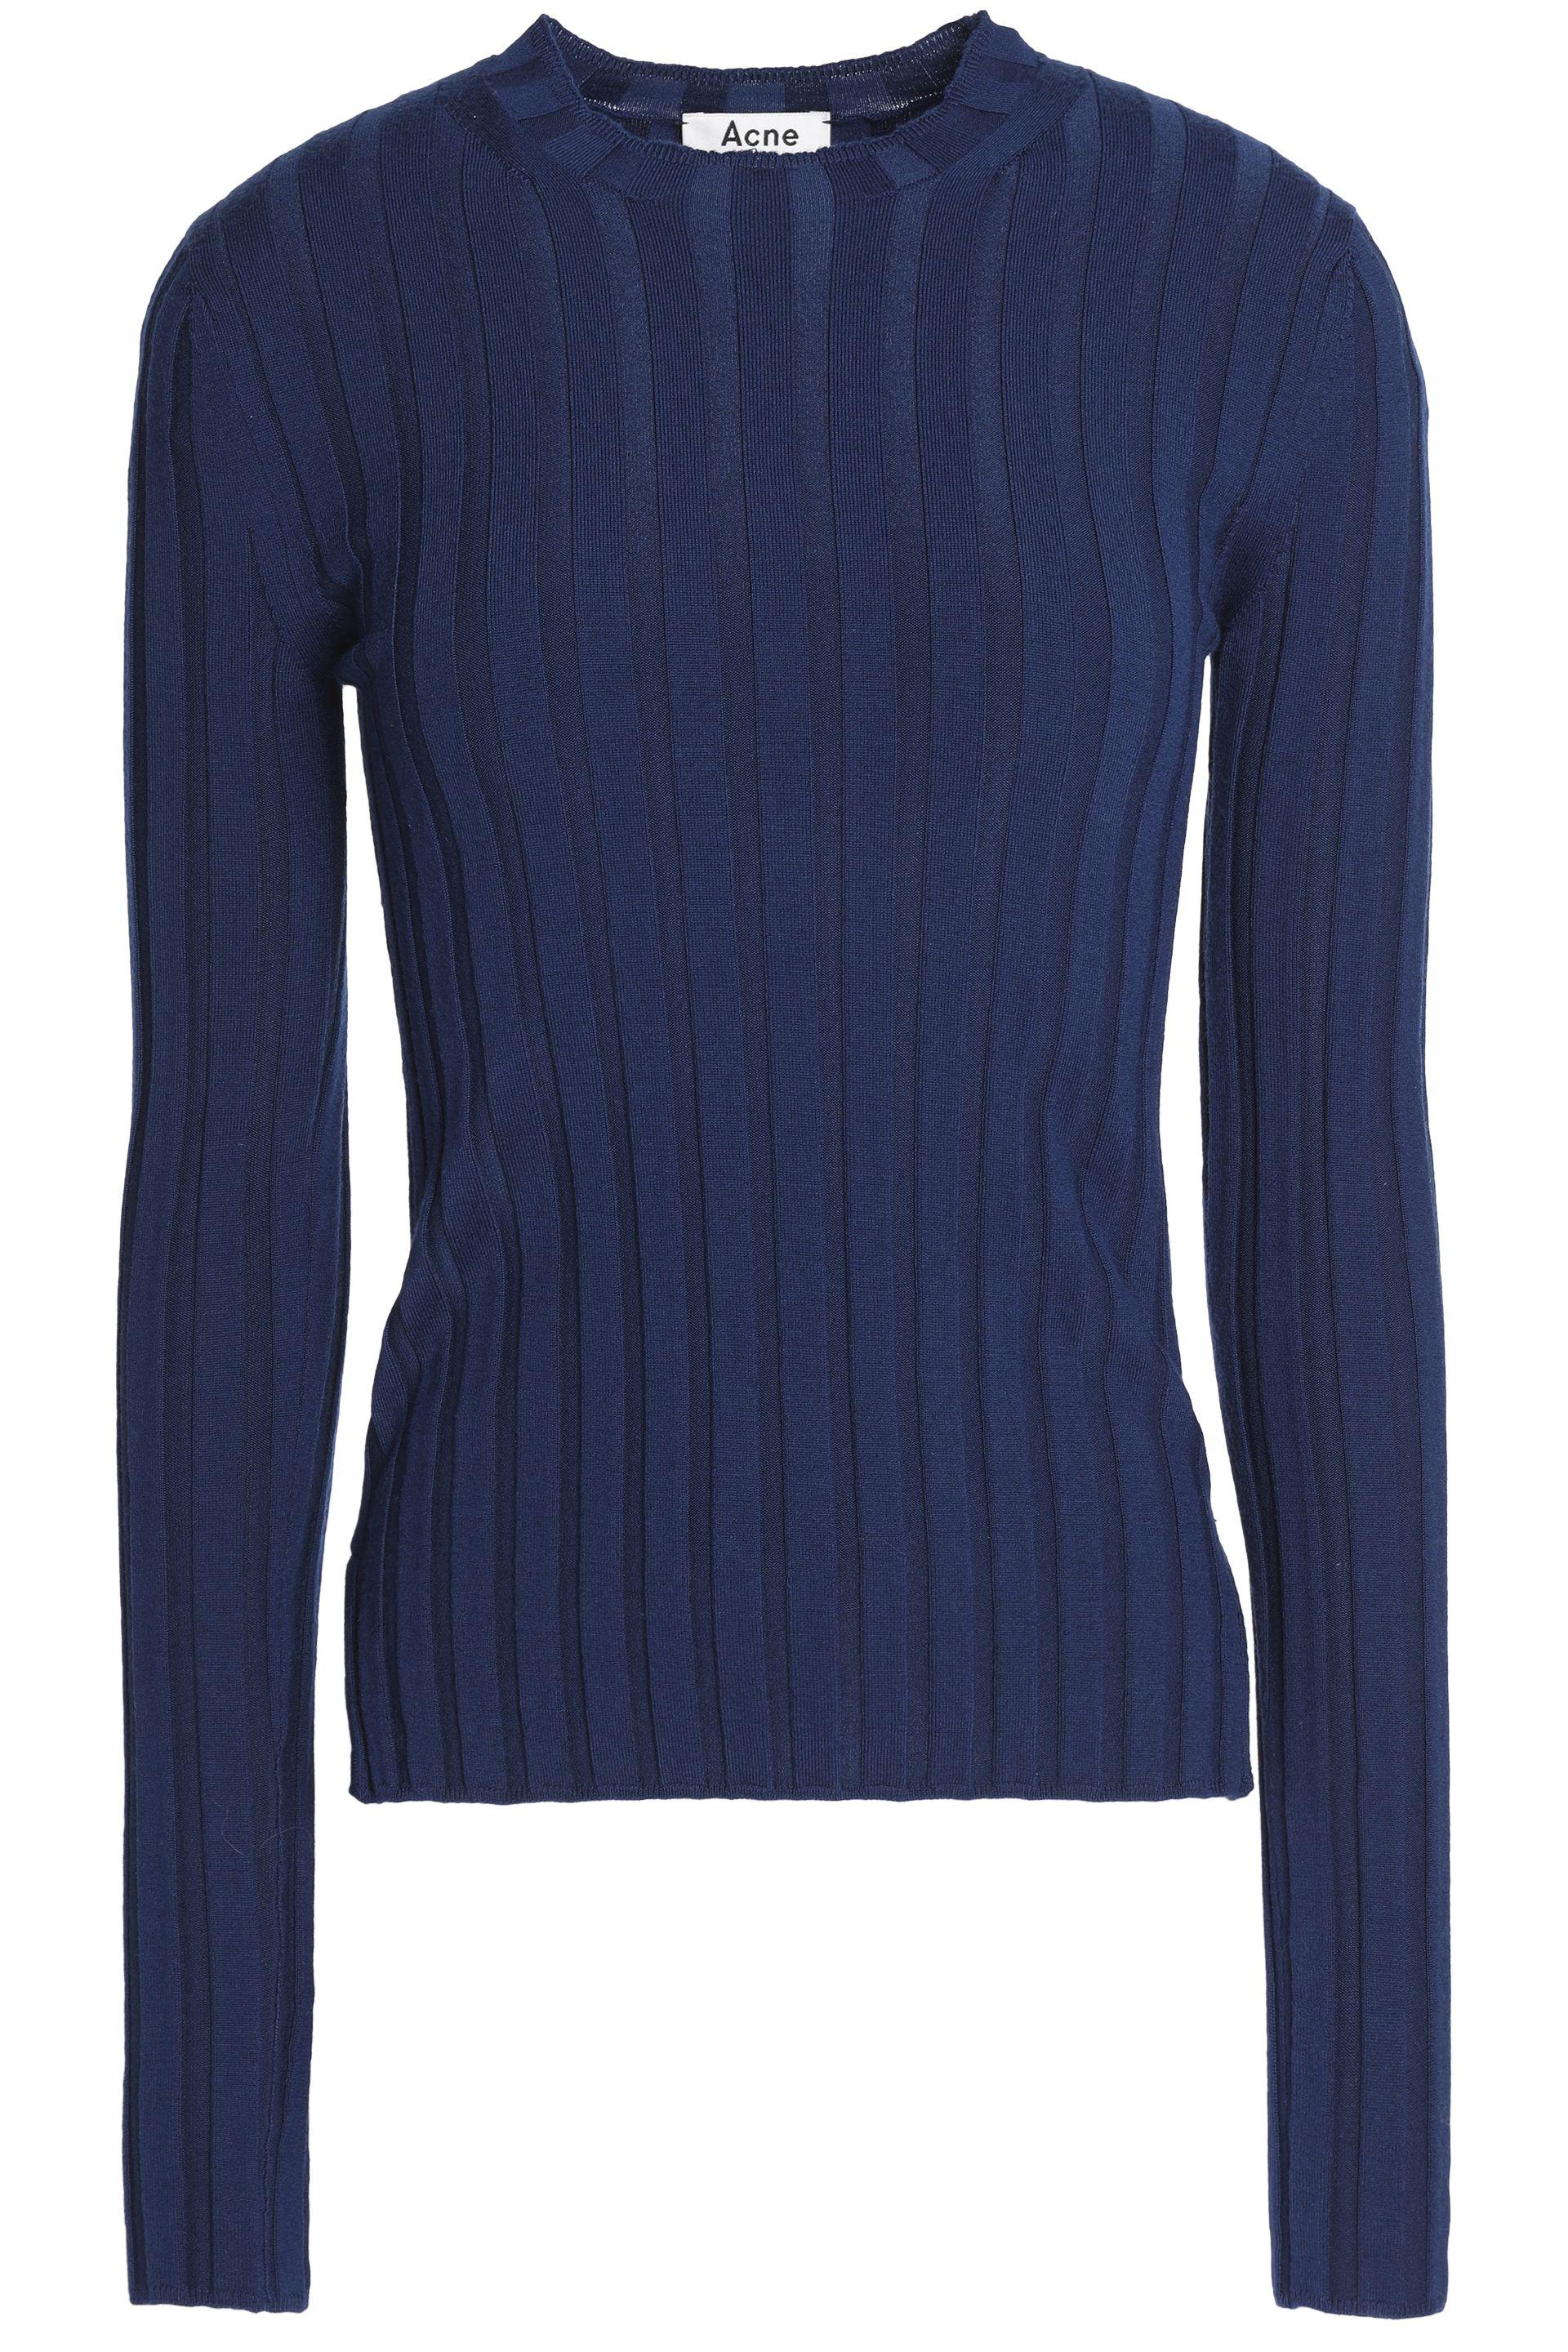 Acne Studios Woman Carin Ribbed Merino Wool-blend Sweater Navy in Blue ...